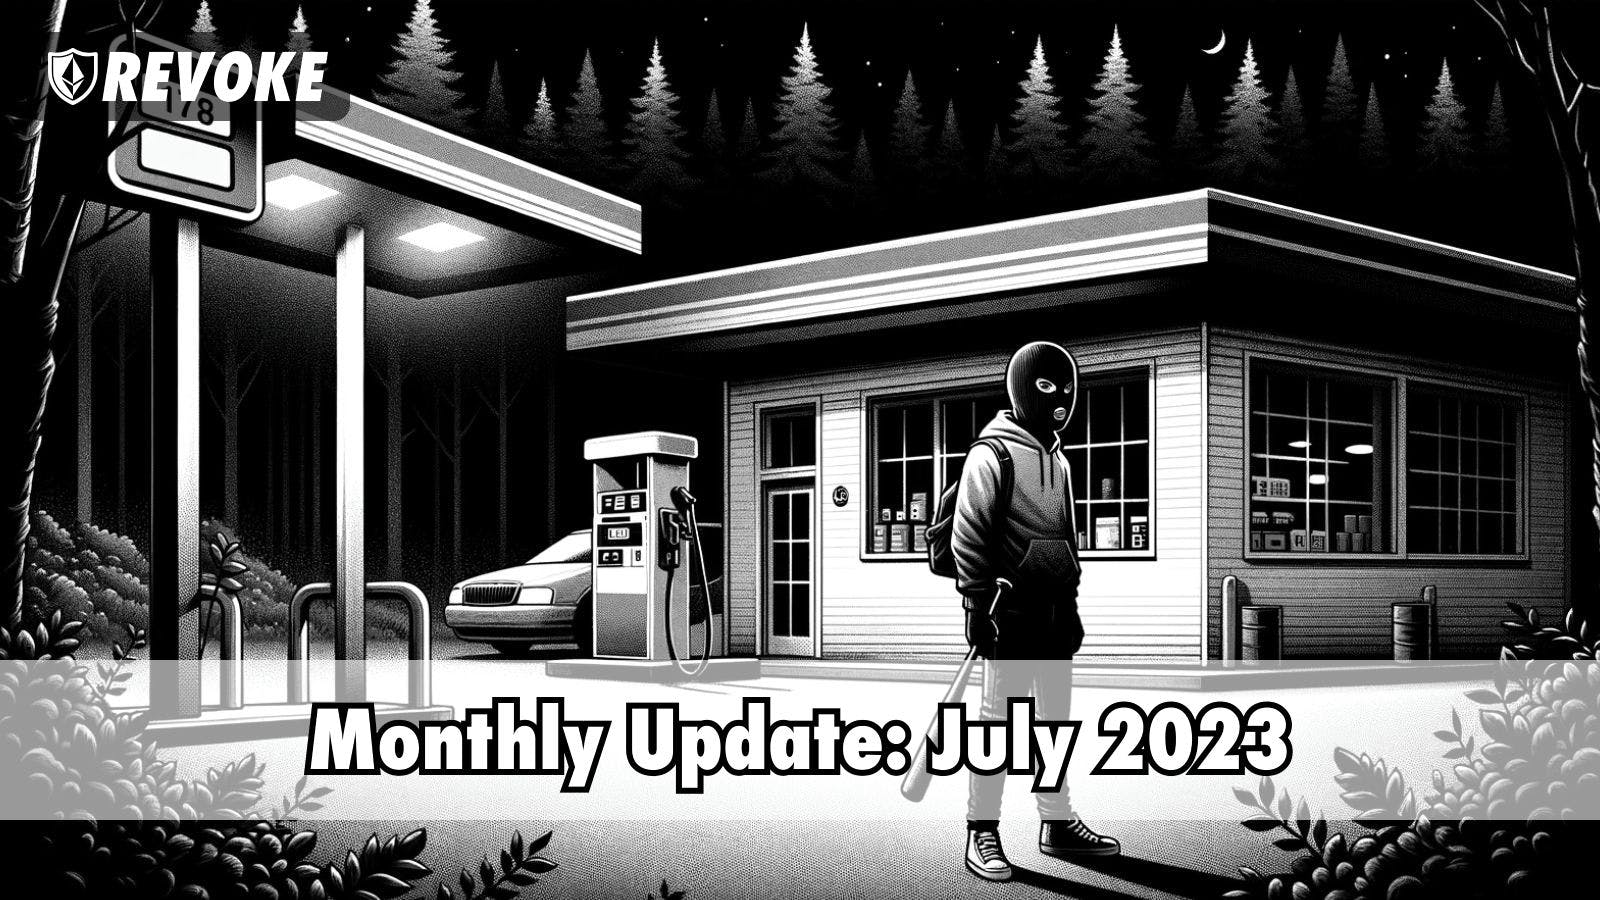 Monthly Update: July 2023